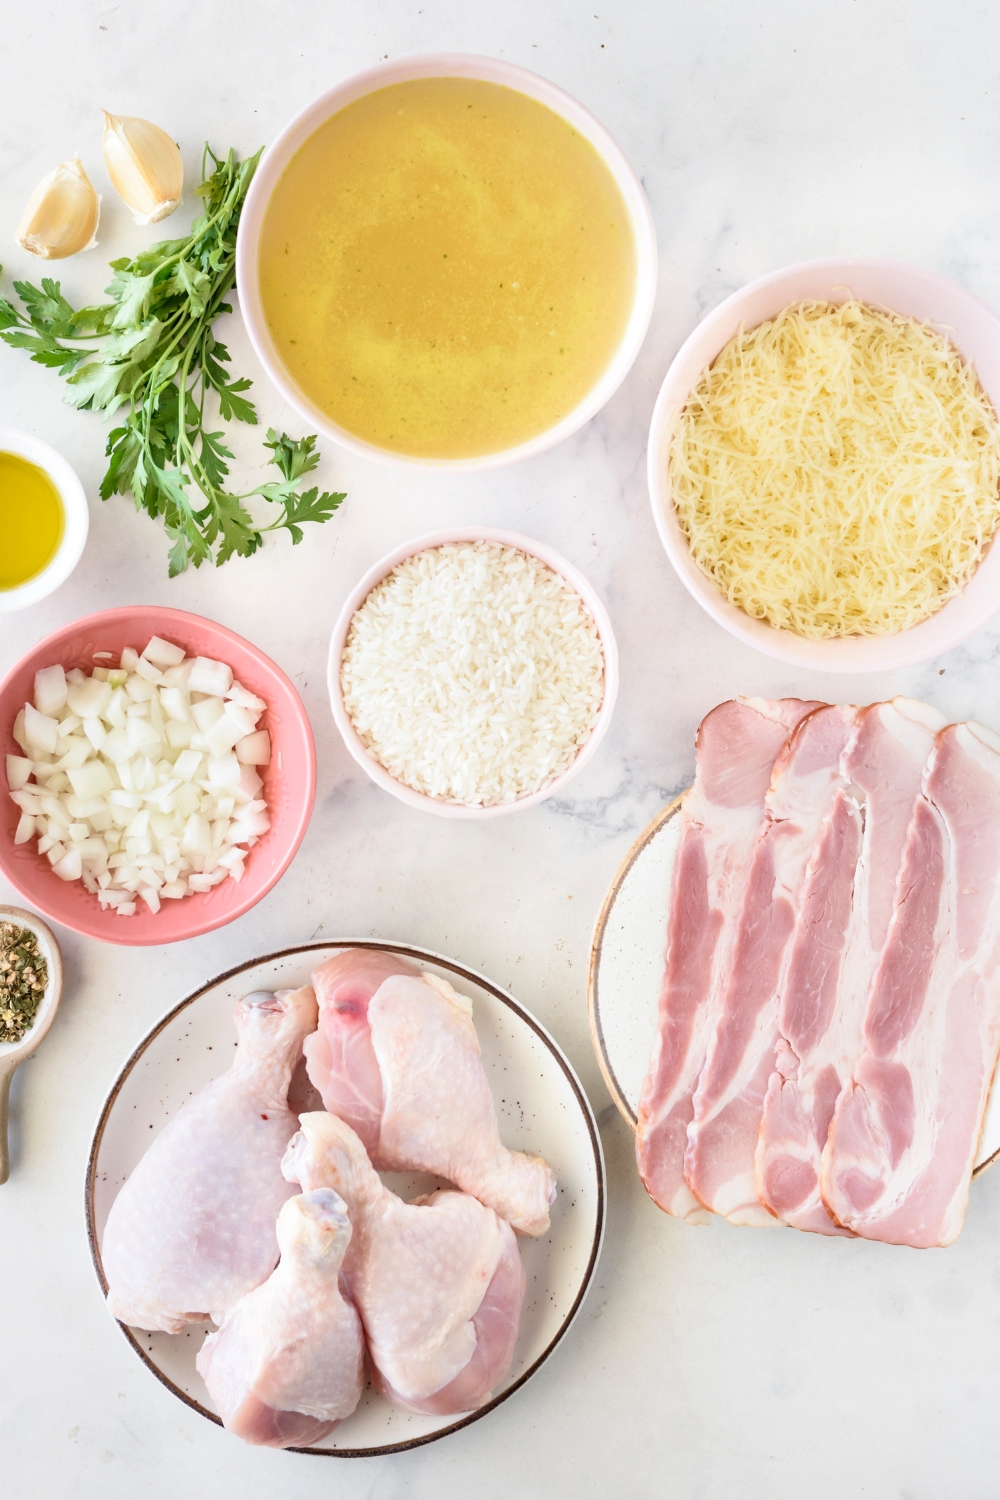 An assortment of ingredients including bowls of broth, shredded cheese, diced onion, plates of uncooked bacon and raw chicken thighs, and a bunch of parsley next to two garlic cloves.